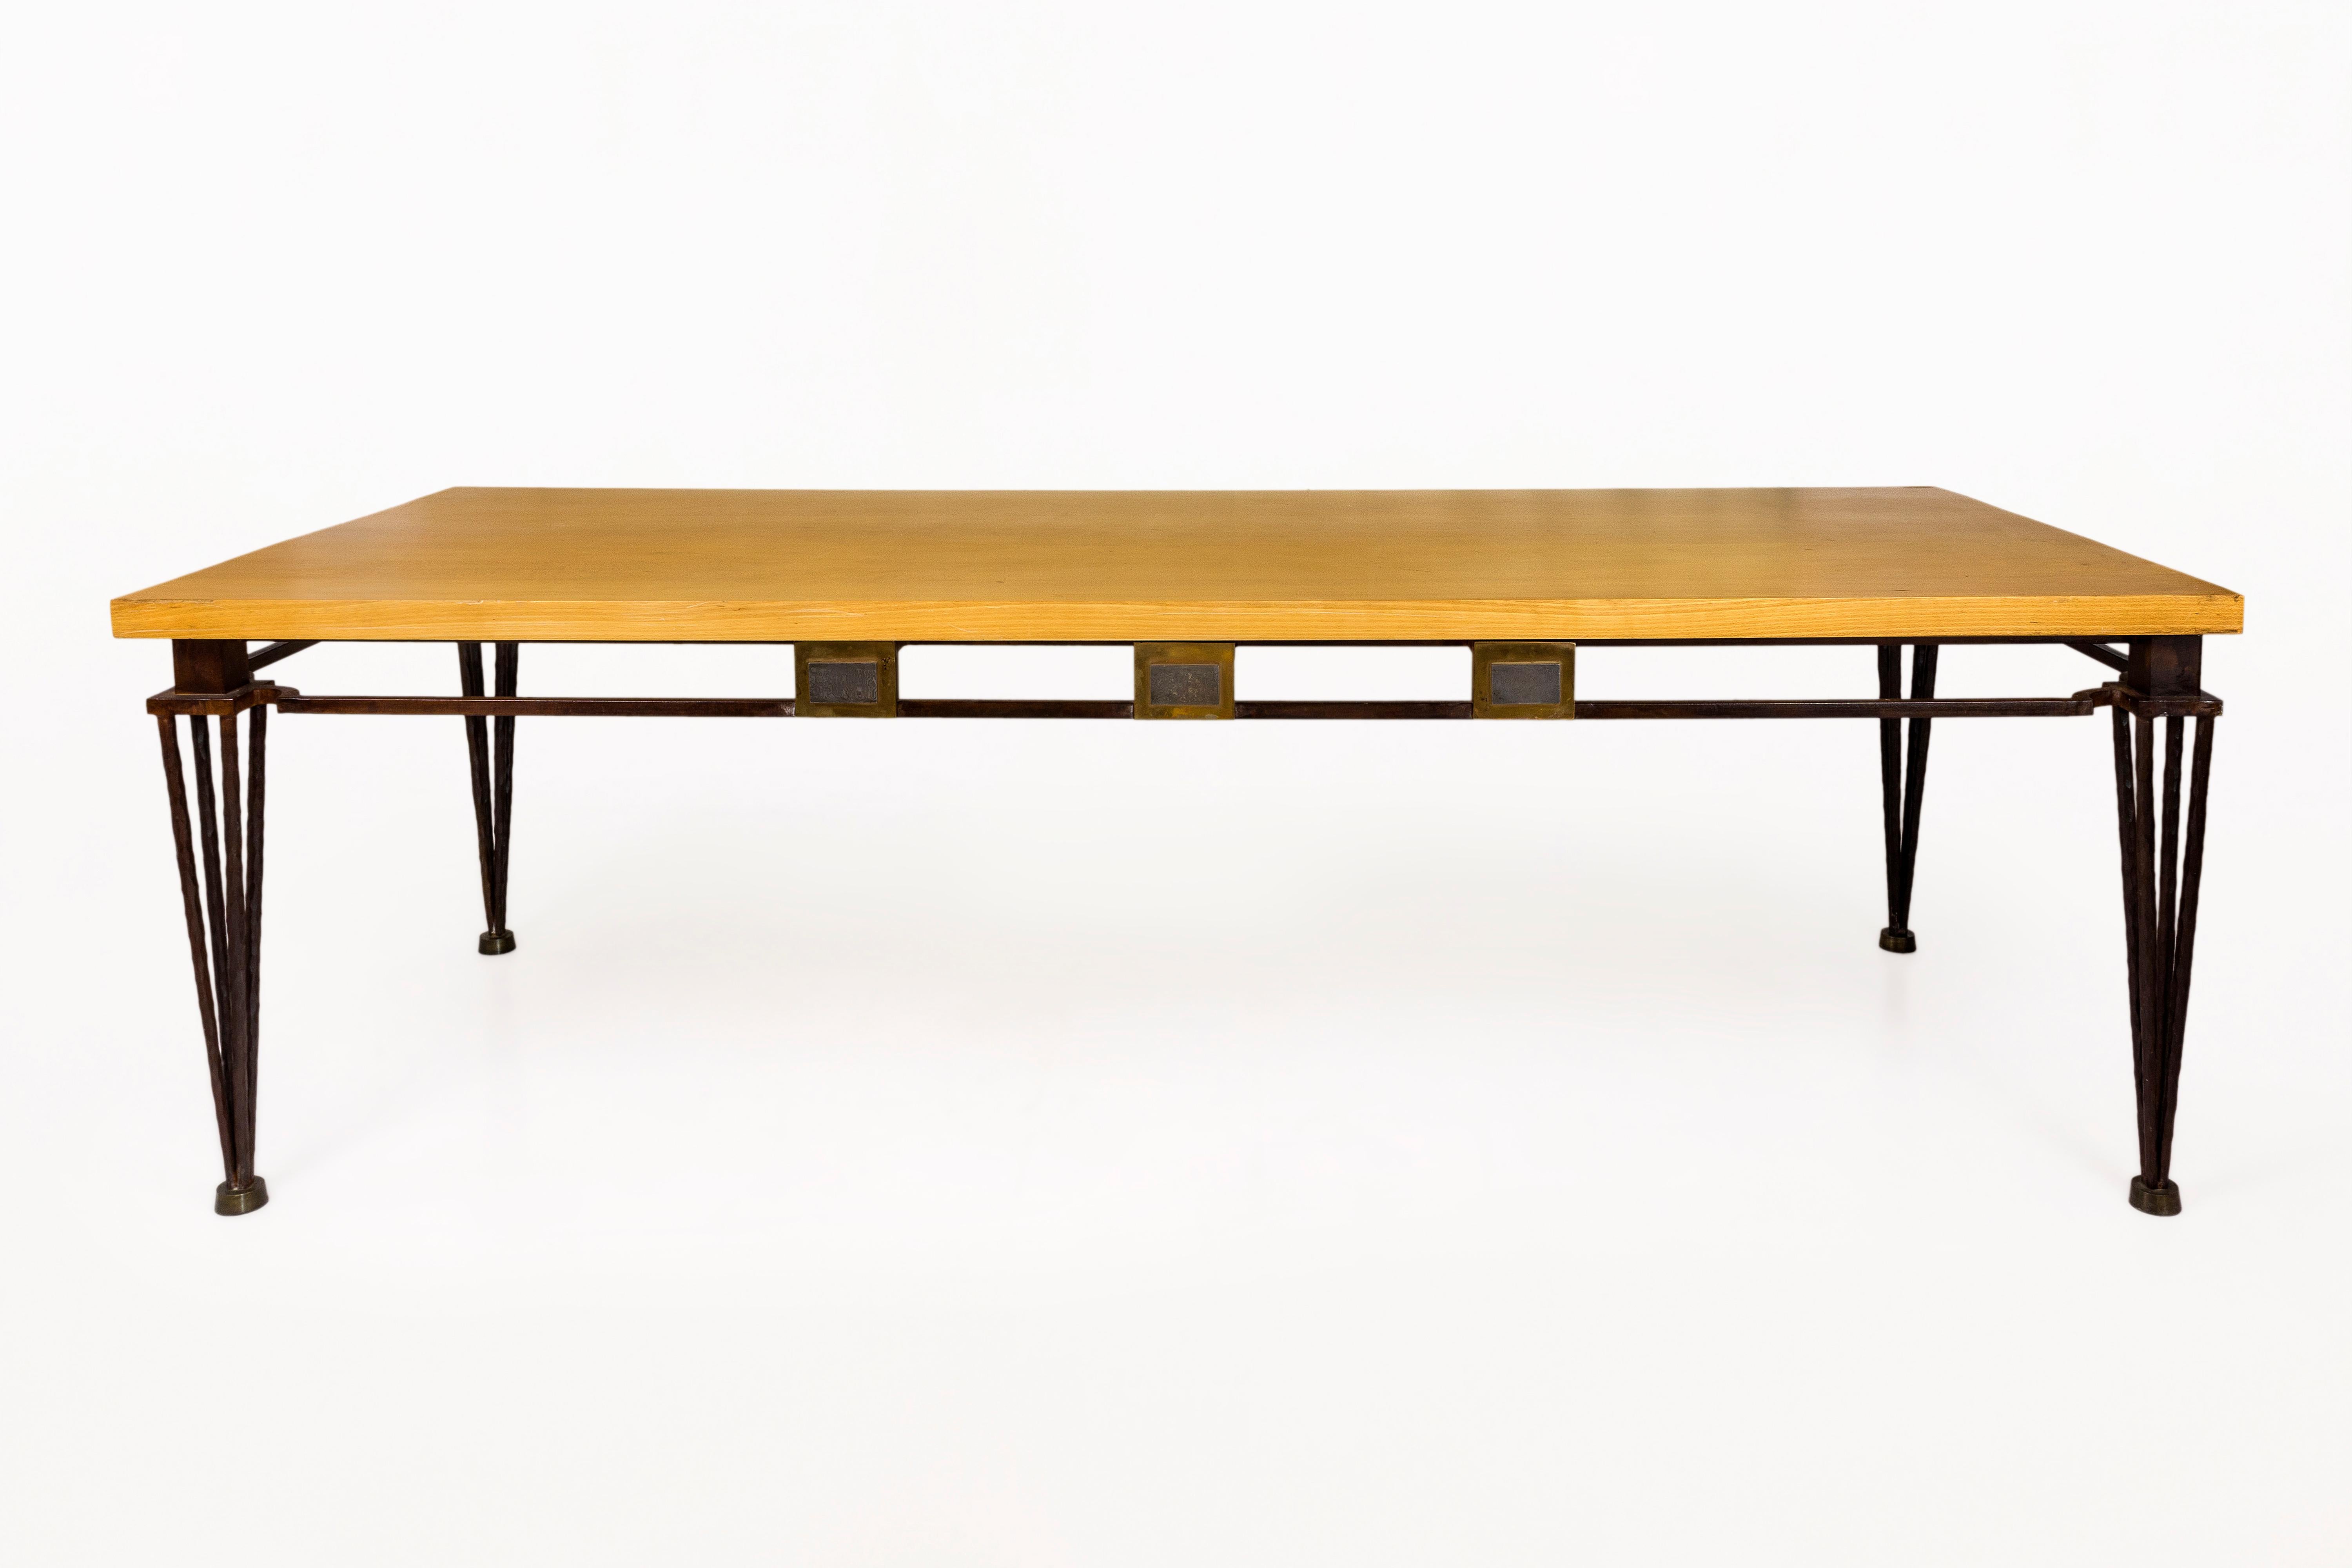 Jean Louis Hurlin dining table.
Hammered iron base and oak top
Decorative metal side panels
Important table: Size, design, style,
circa 1980, France.
Good vintage condition.
Provenance: Acquired from the collector for whom the artist made the table.